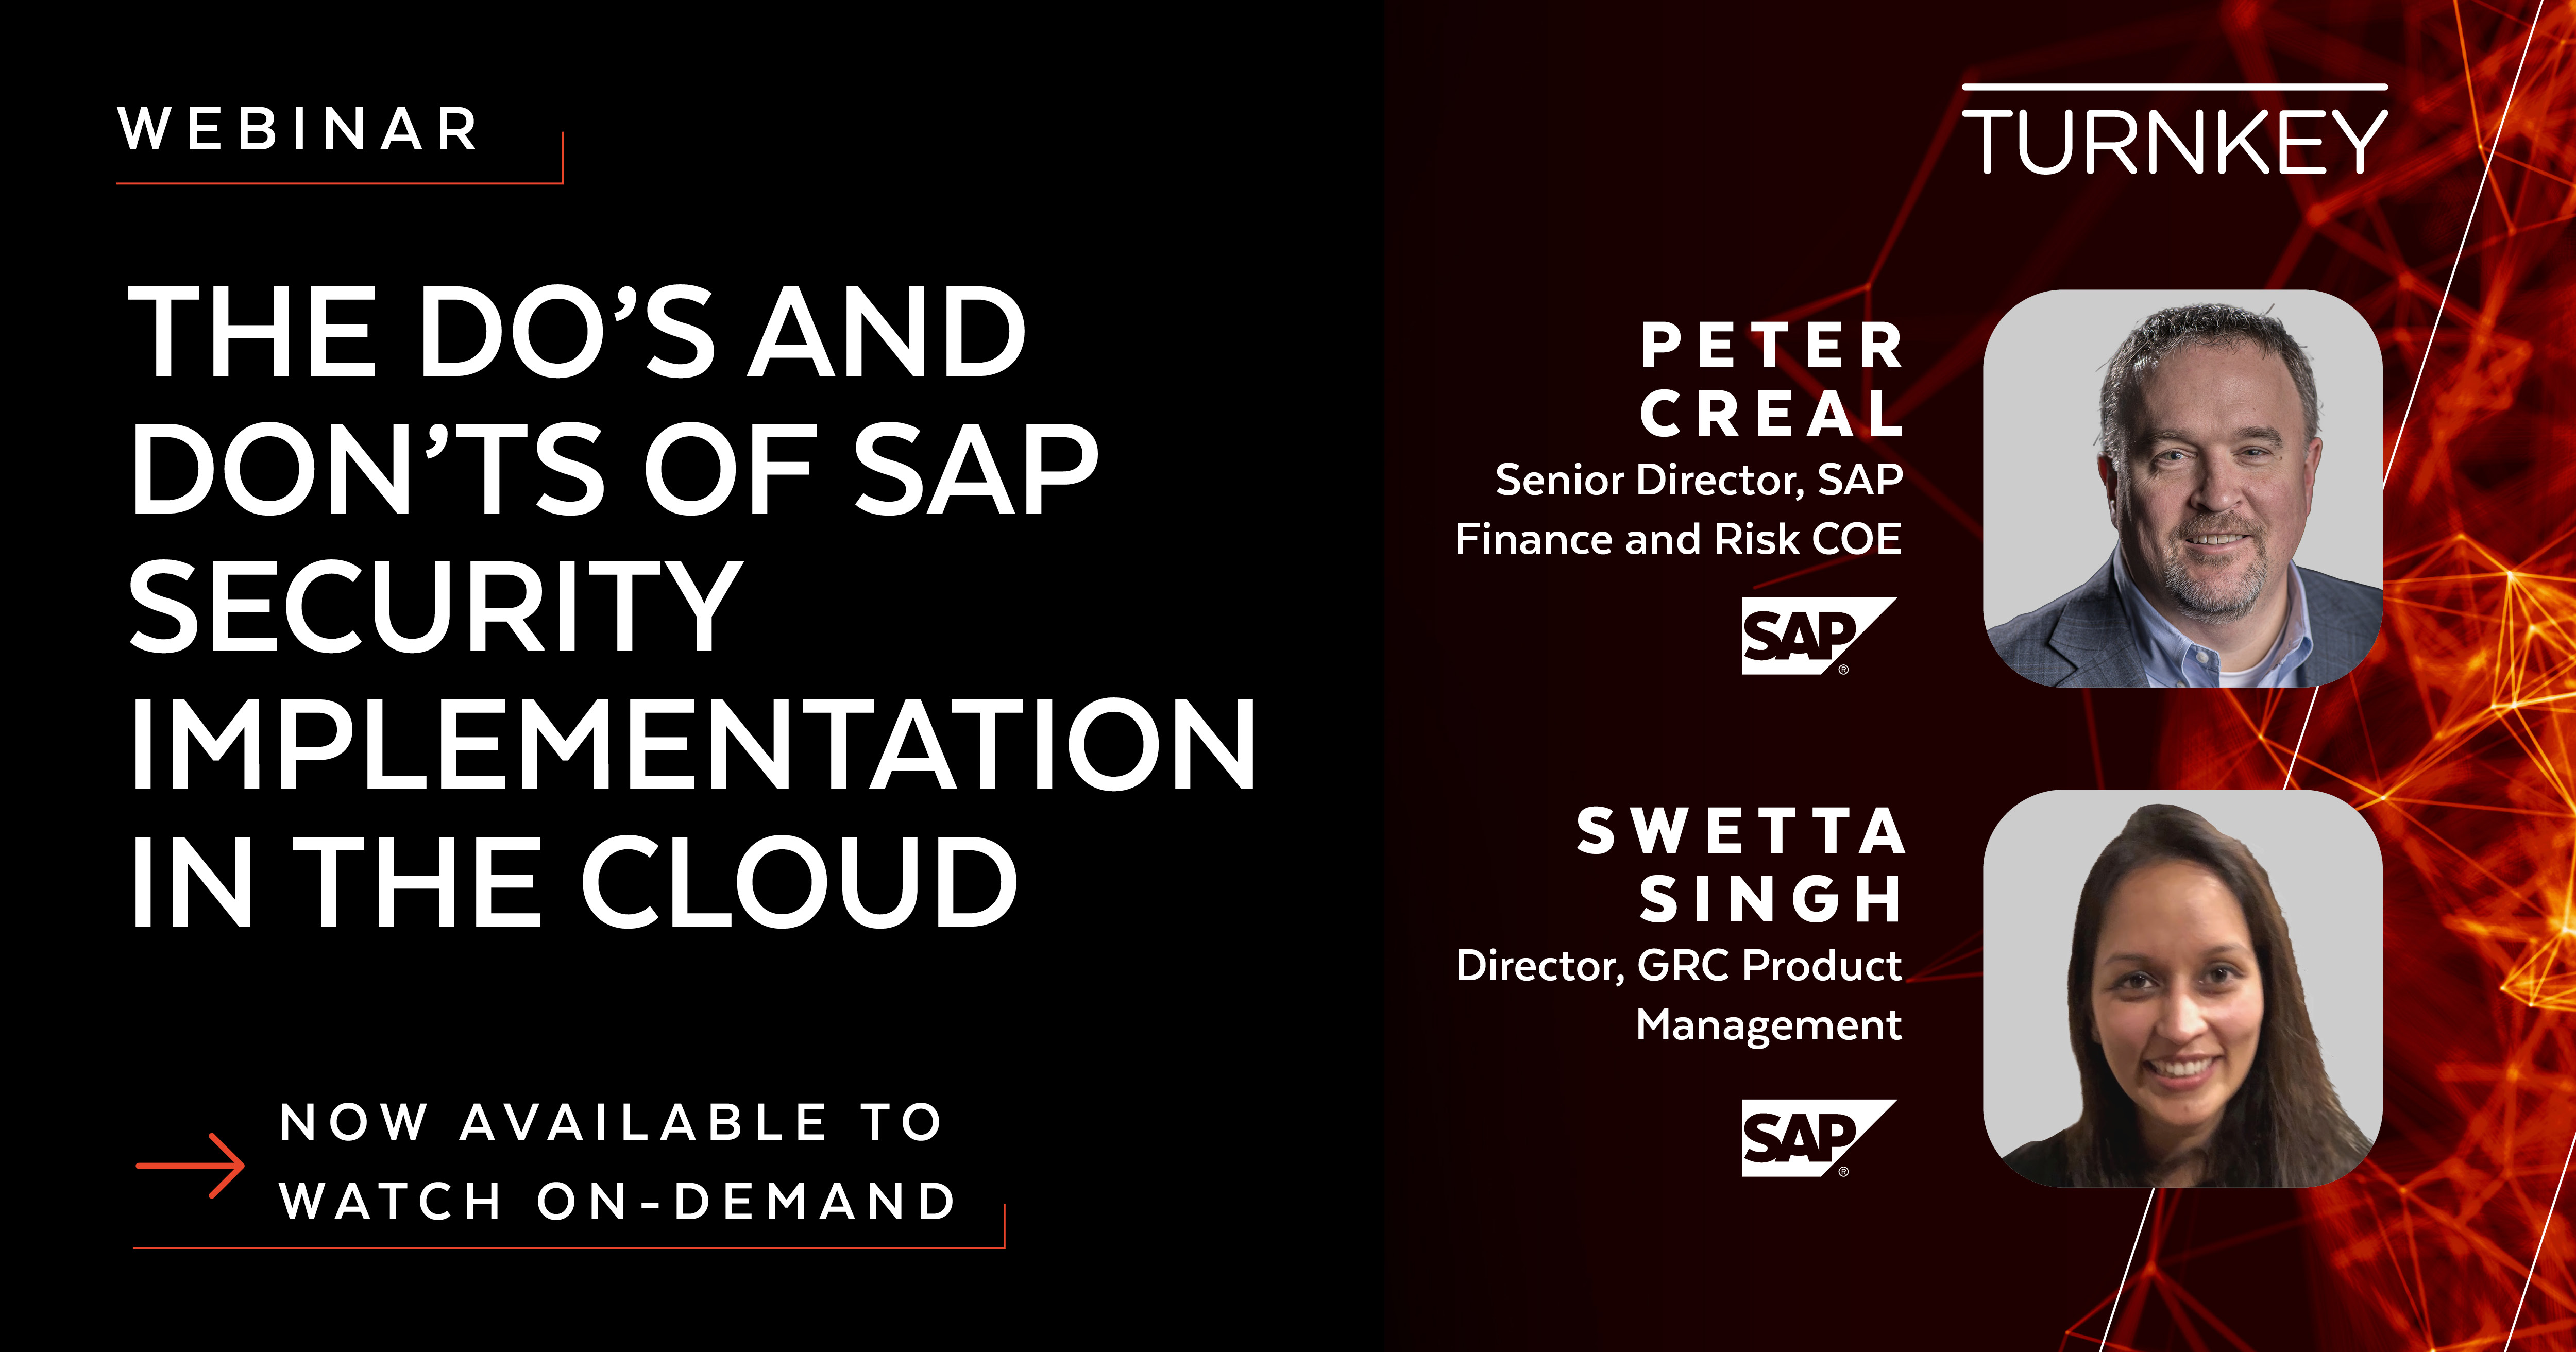 Turnkey The do’s and don’ts of SAP security implementation in the cloud OD1-1